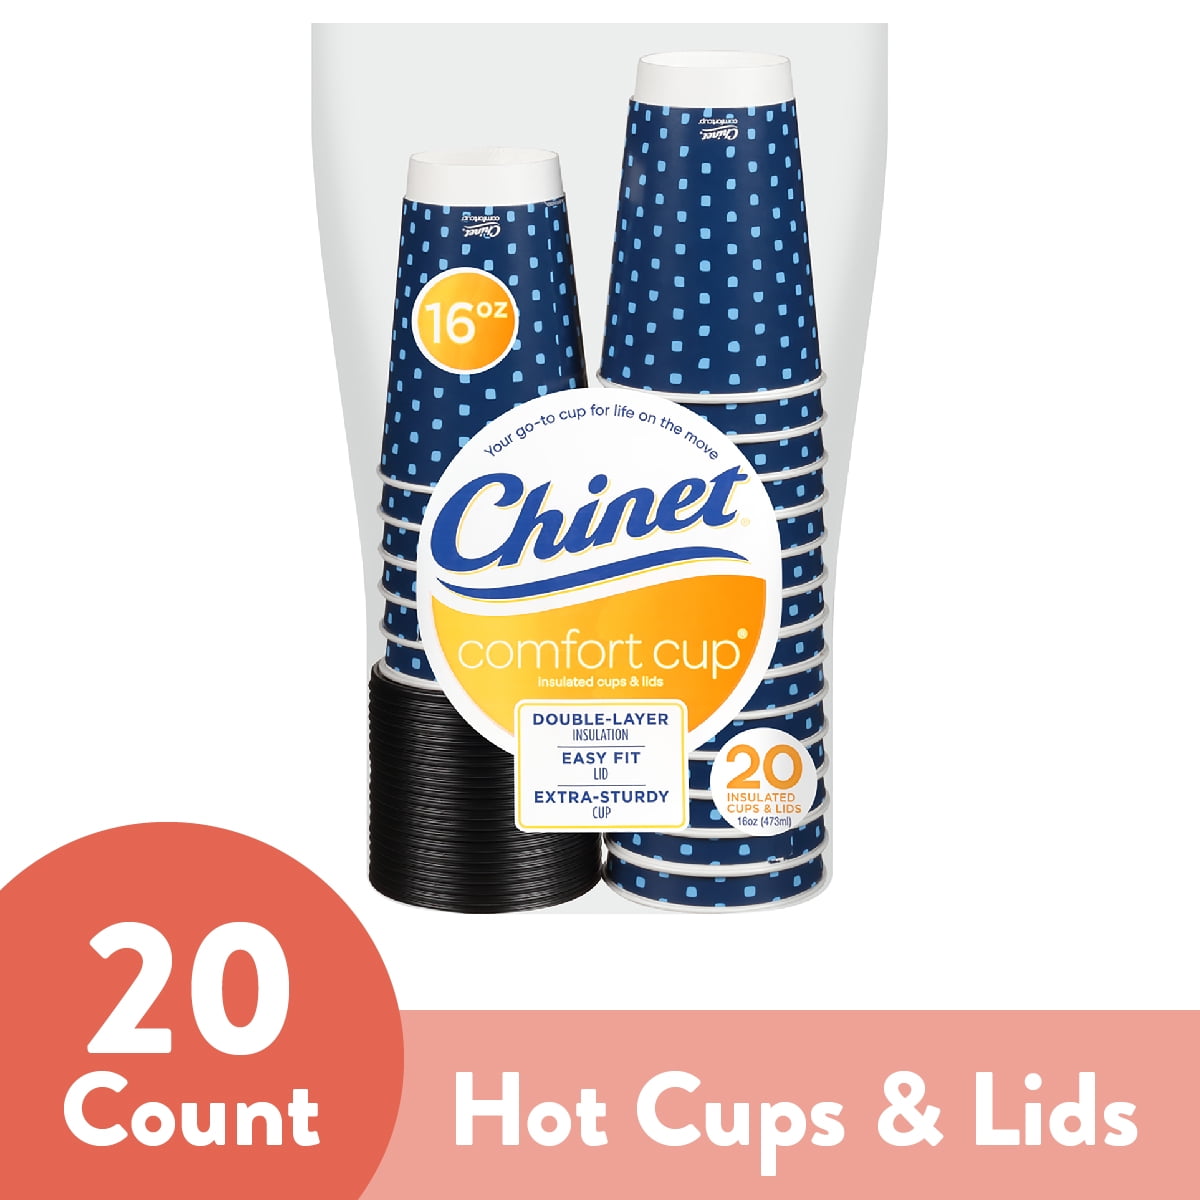 3 Set Chinet Chinet 16 Oz Comfort Cups 